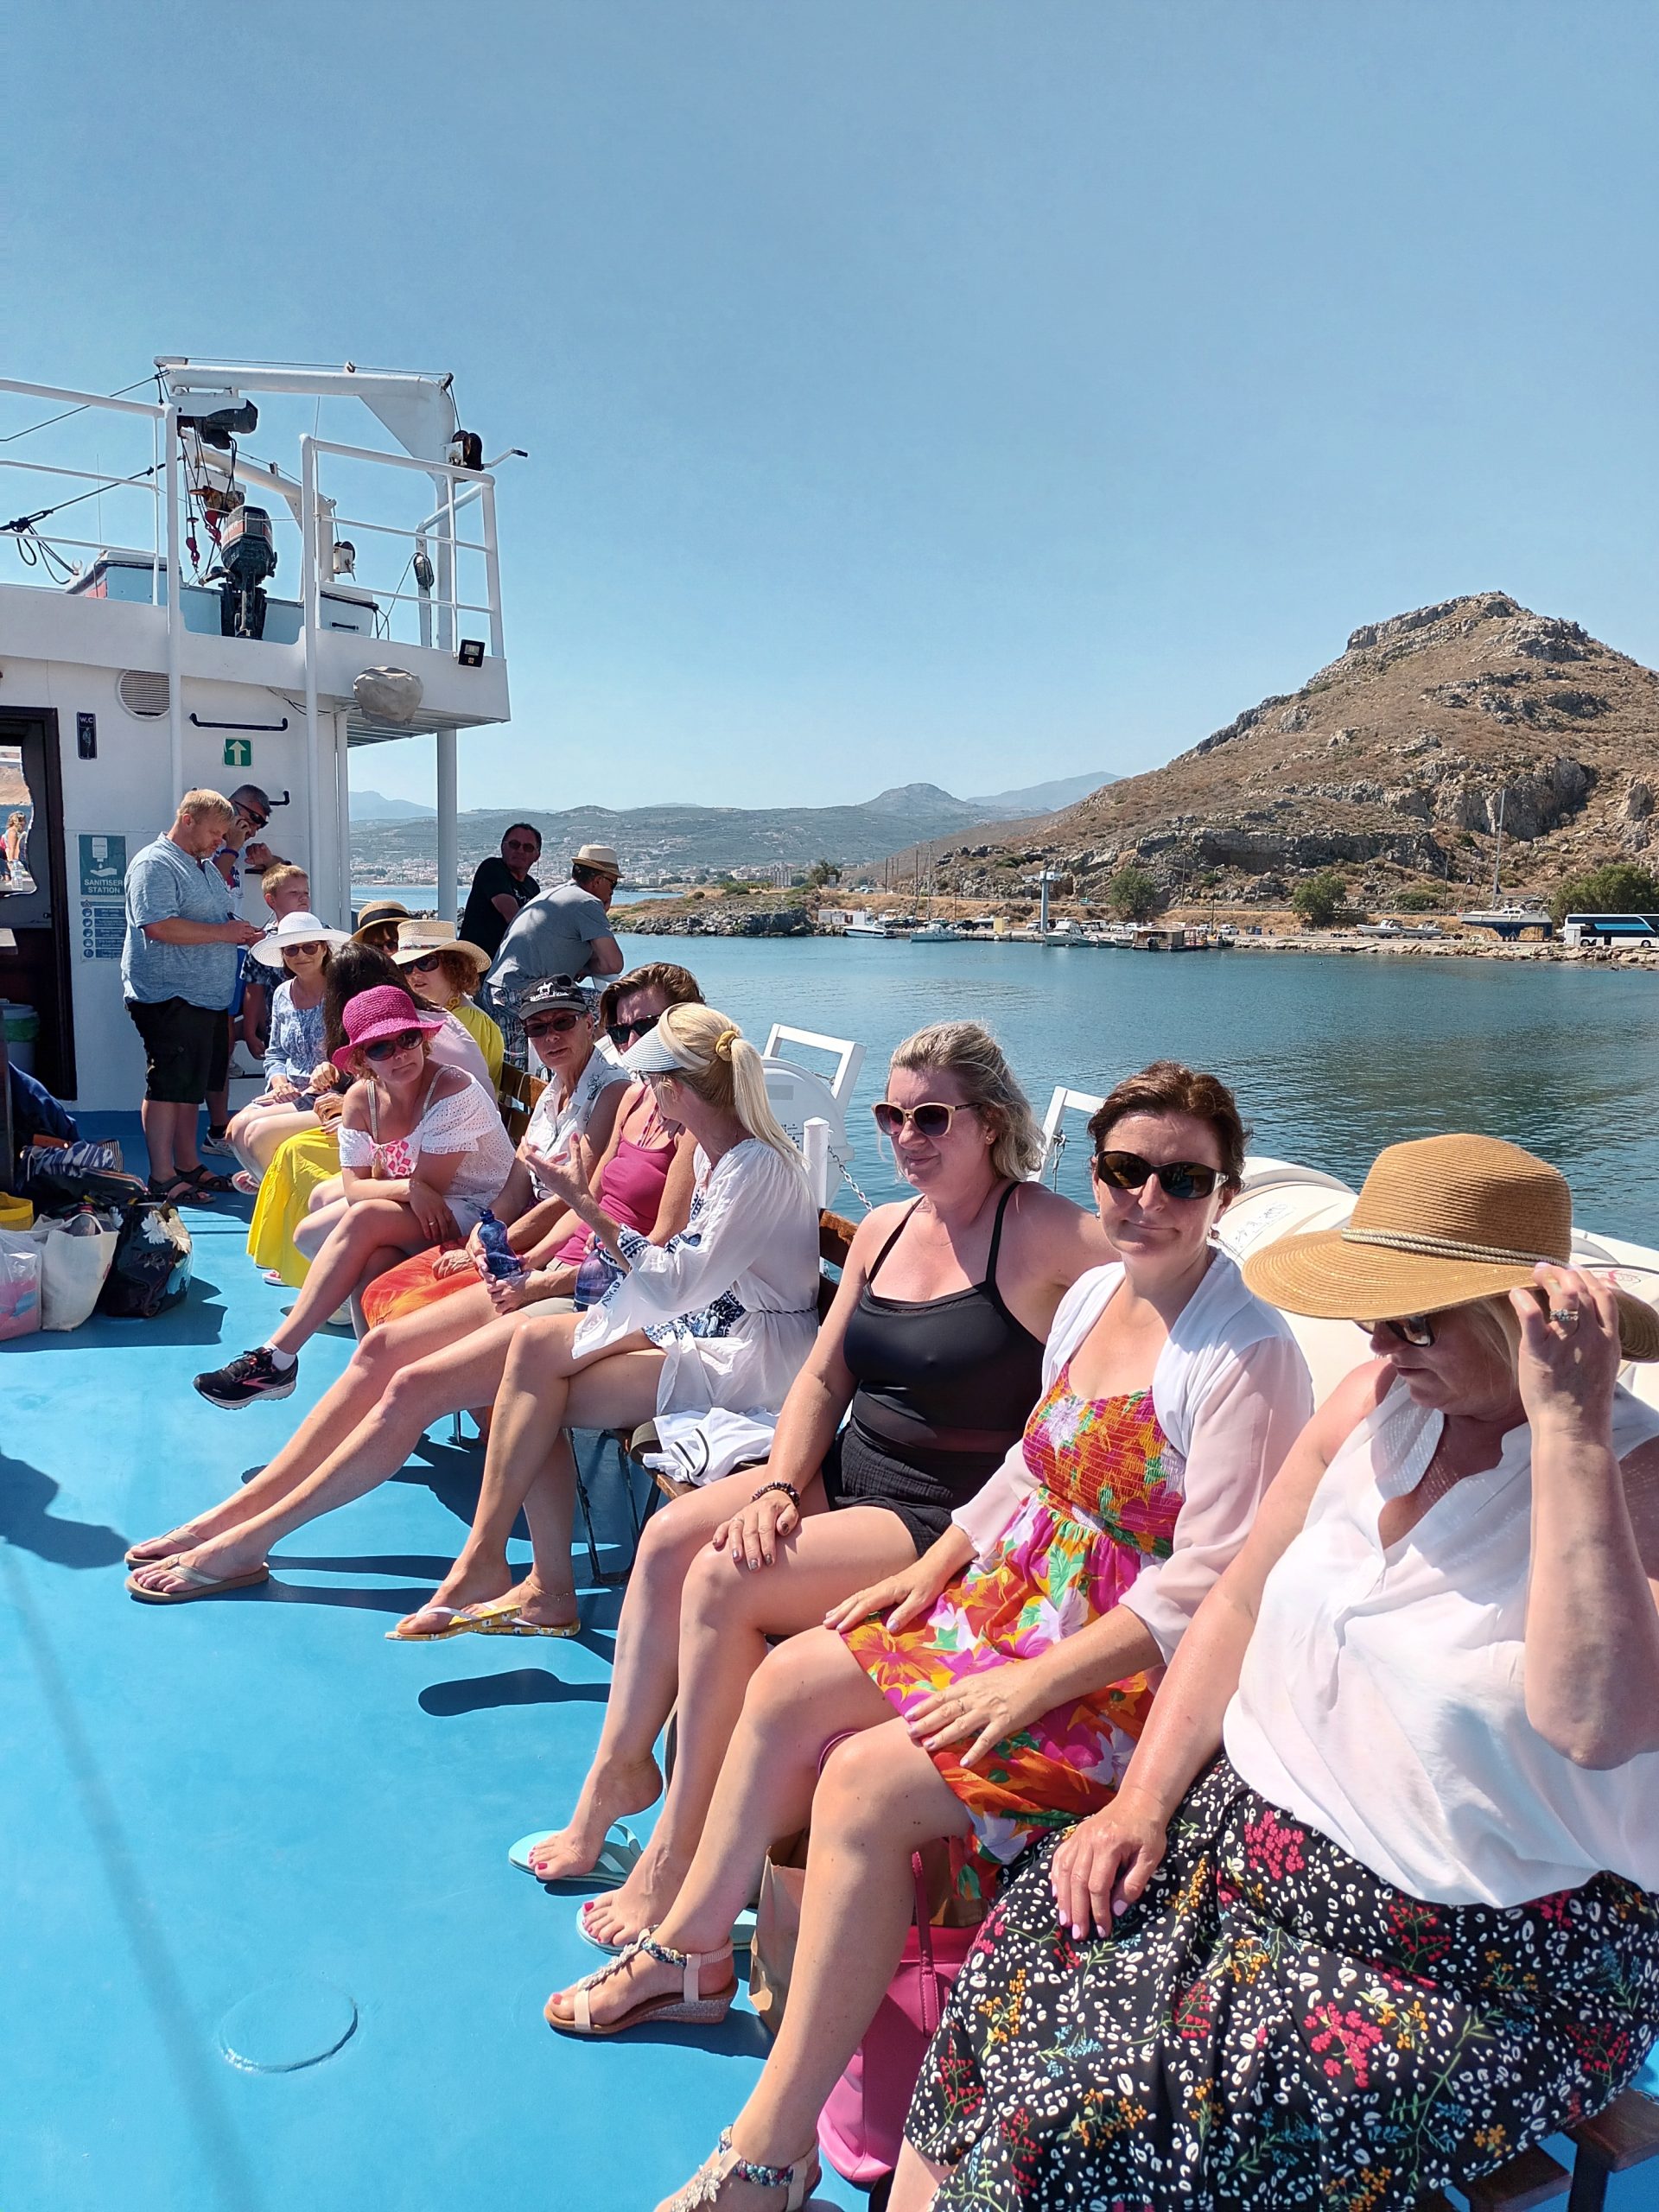 On the boat to Balos